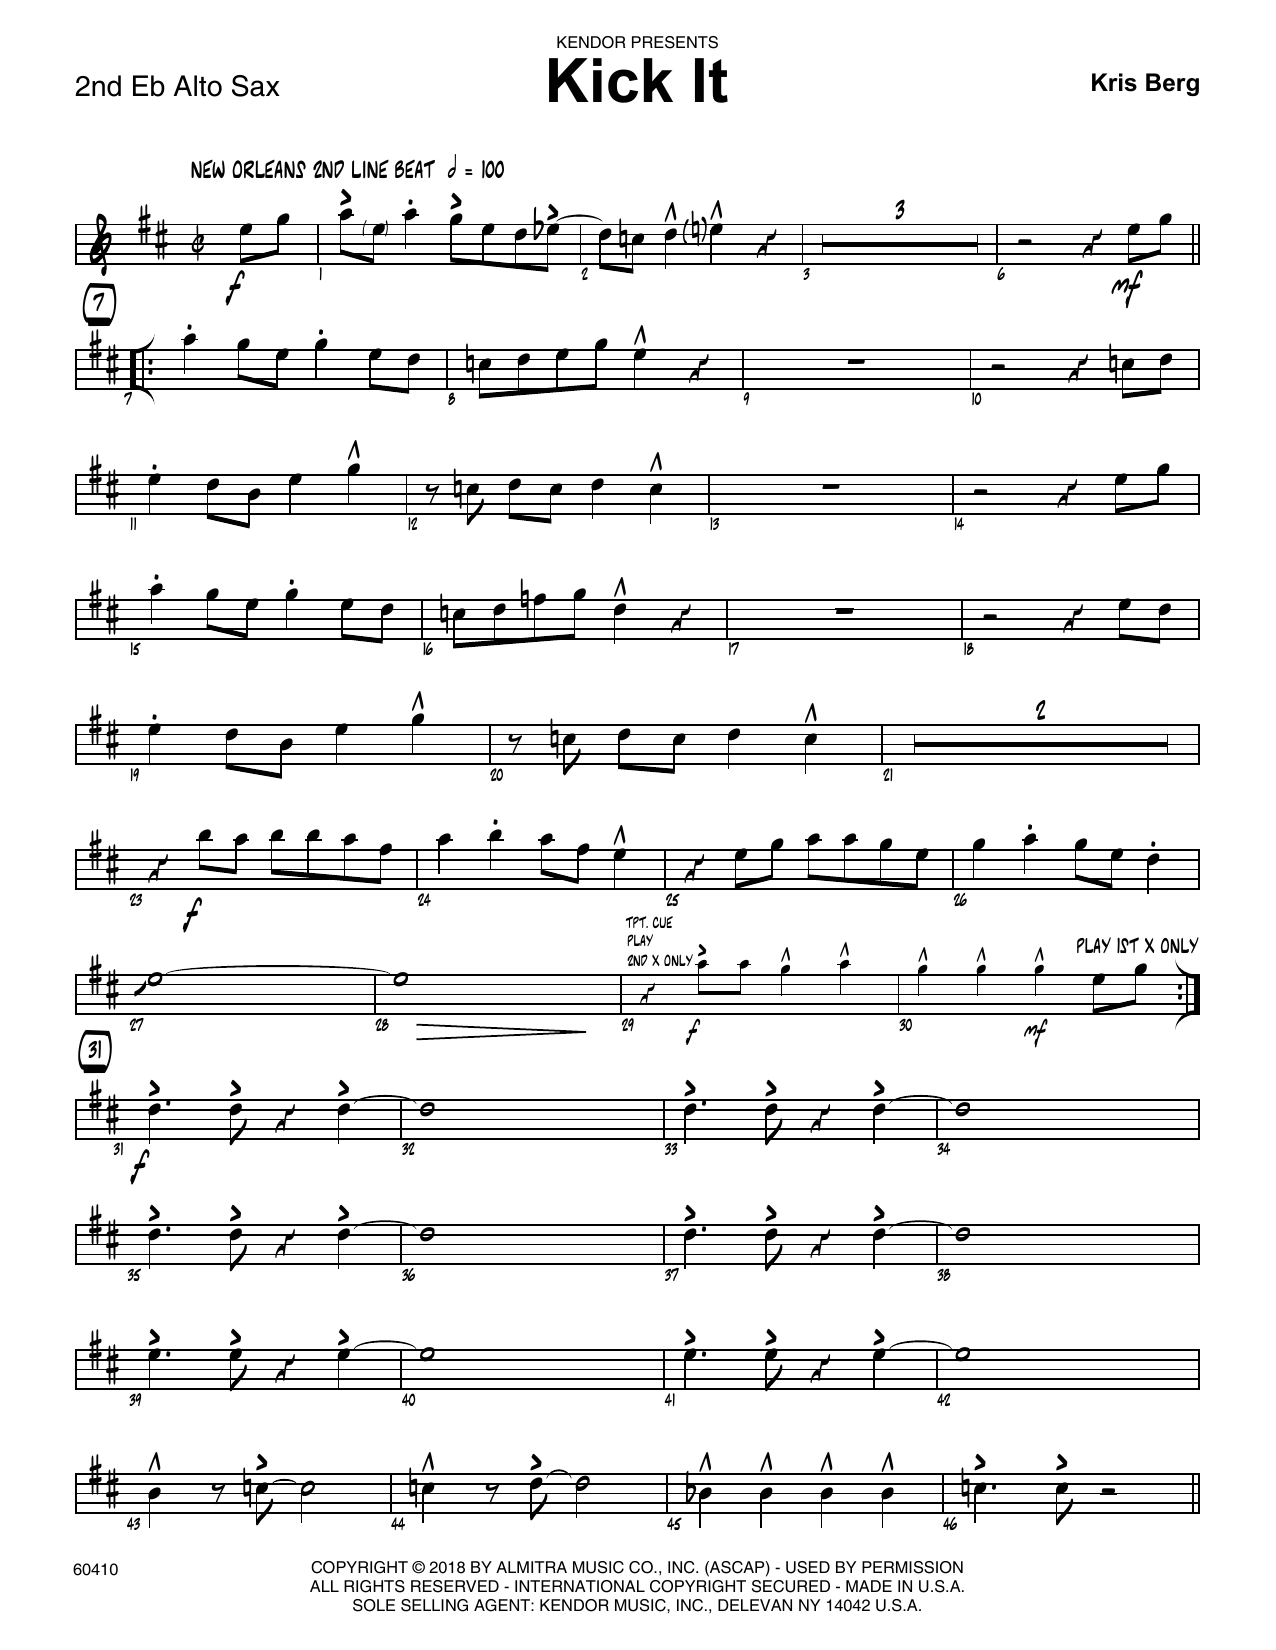 Kris Berg Kick It - 2nd Eb Alto Saxophone sheet music preview music notes and score for Jazz Ensemble including 4 page(s)